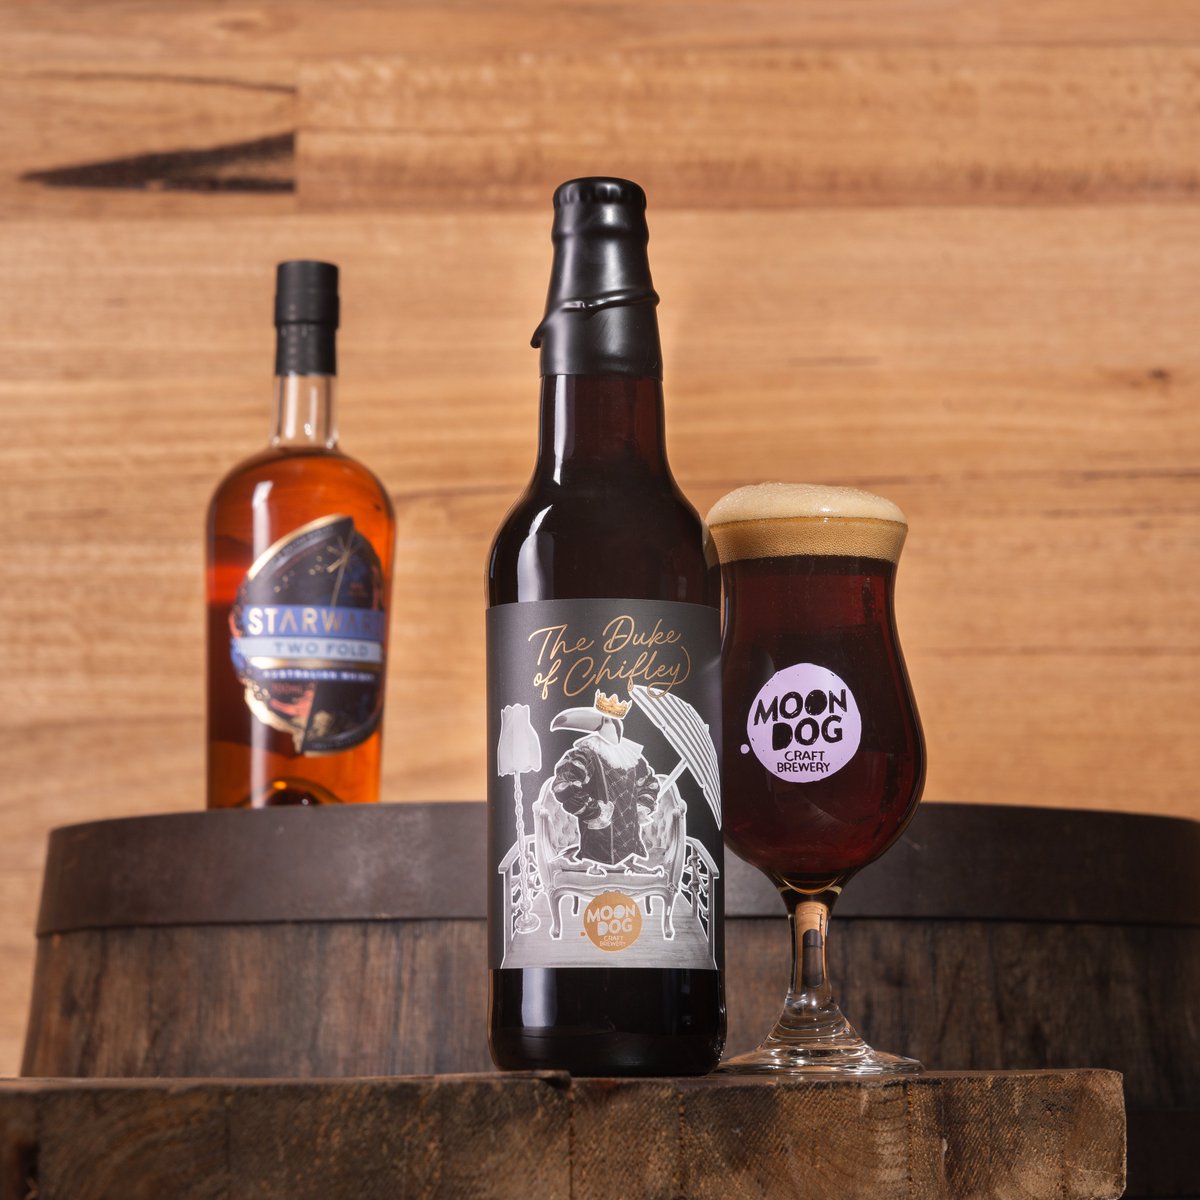 Introducing The Duke of Chifley Barley Wine! The Duke of Chifley had a nice long beauty sleep in Starward whisky barrels for over 12 months and the result is a big, boozy beer with a sophisticated sweetness! Shop here: bitly.com/MoonDogStore